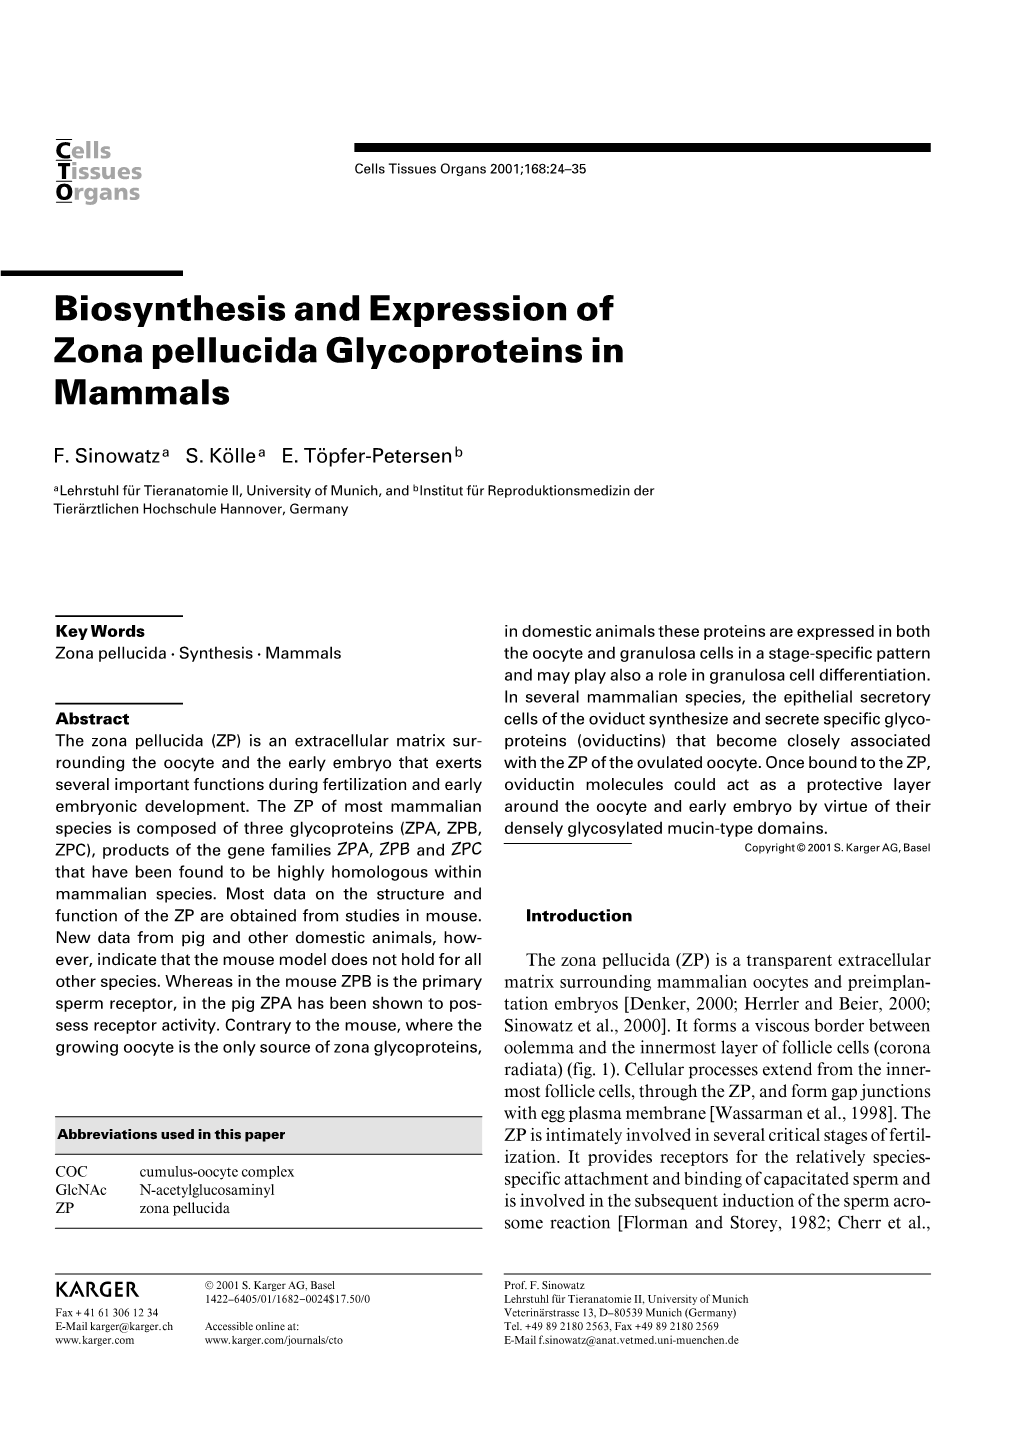 Biosynthesis and Expression of Zona Pellucida Glycoproteins in Mammals